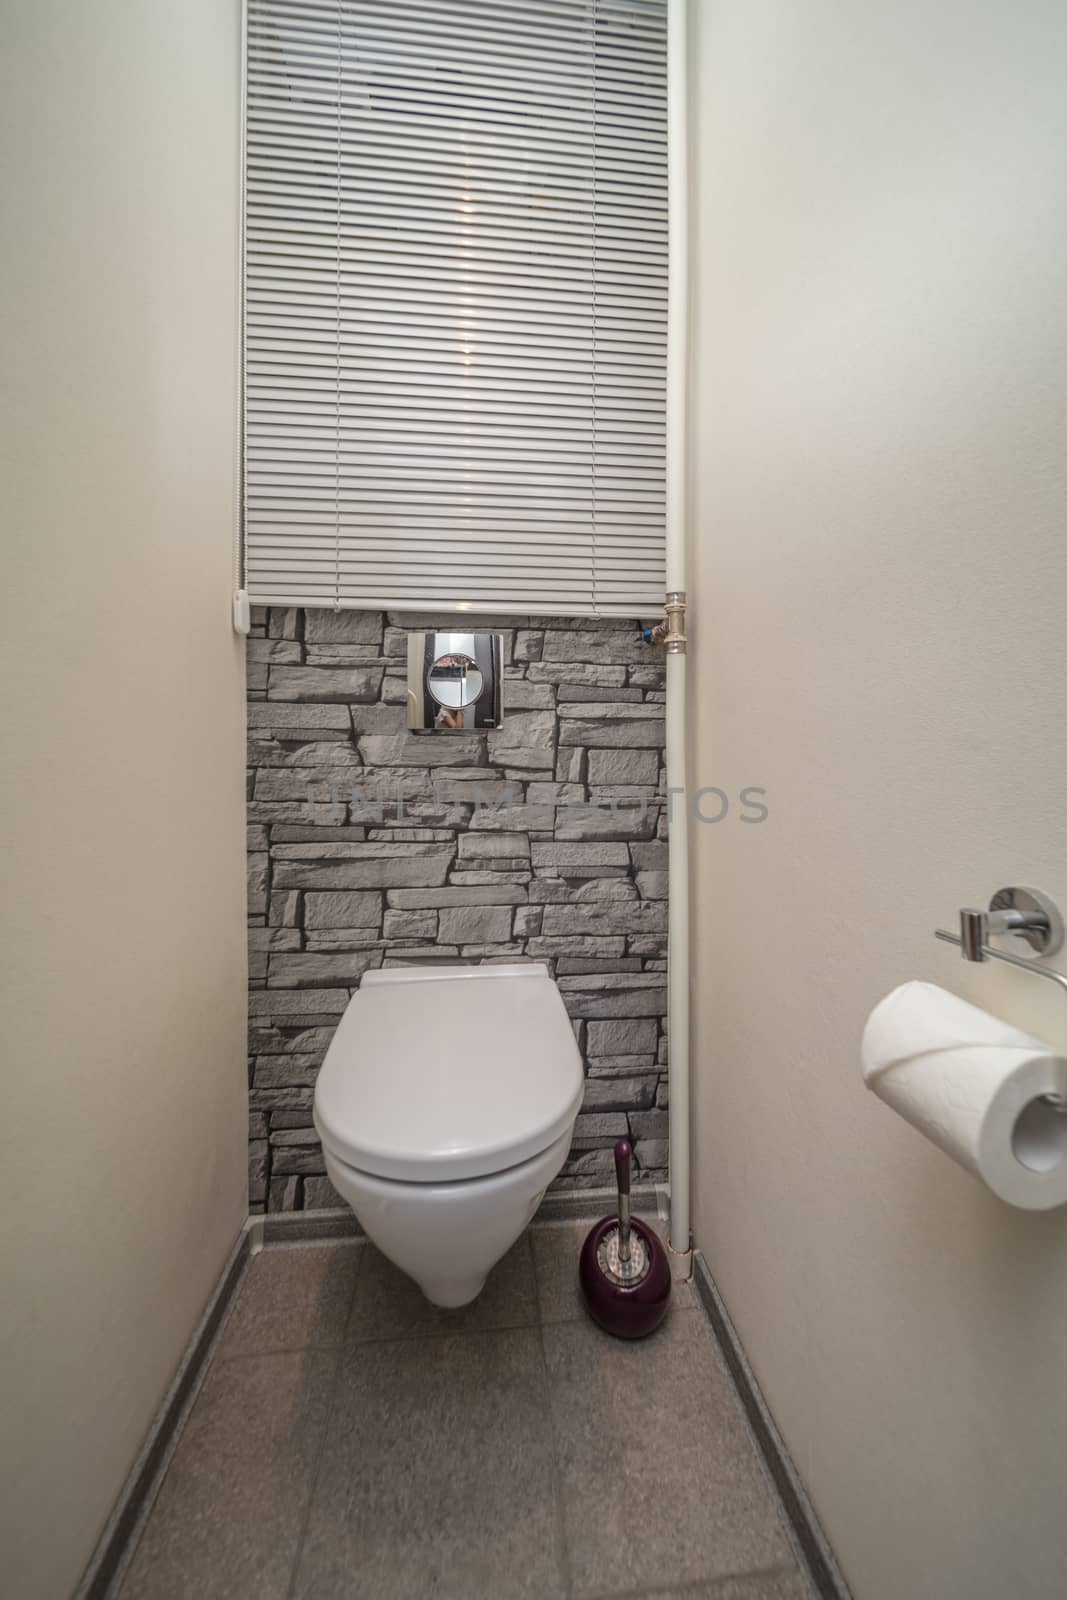 Toilet bowl in the bathroom. Restroom with grey wall decoration